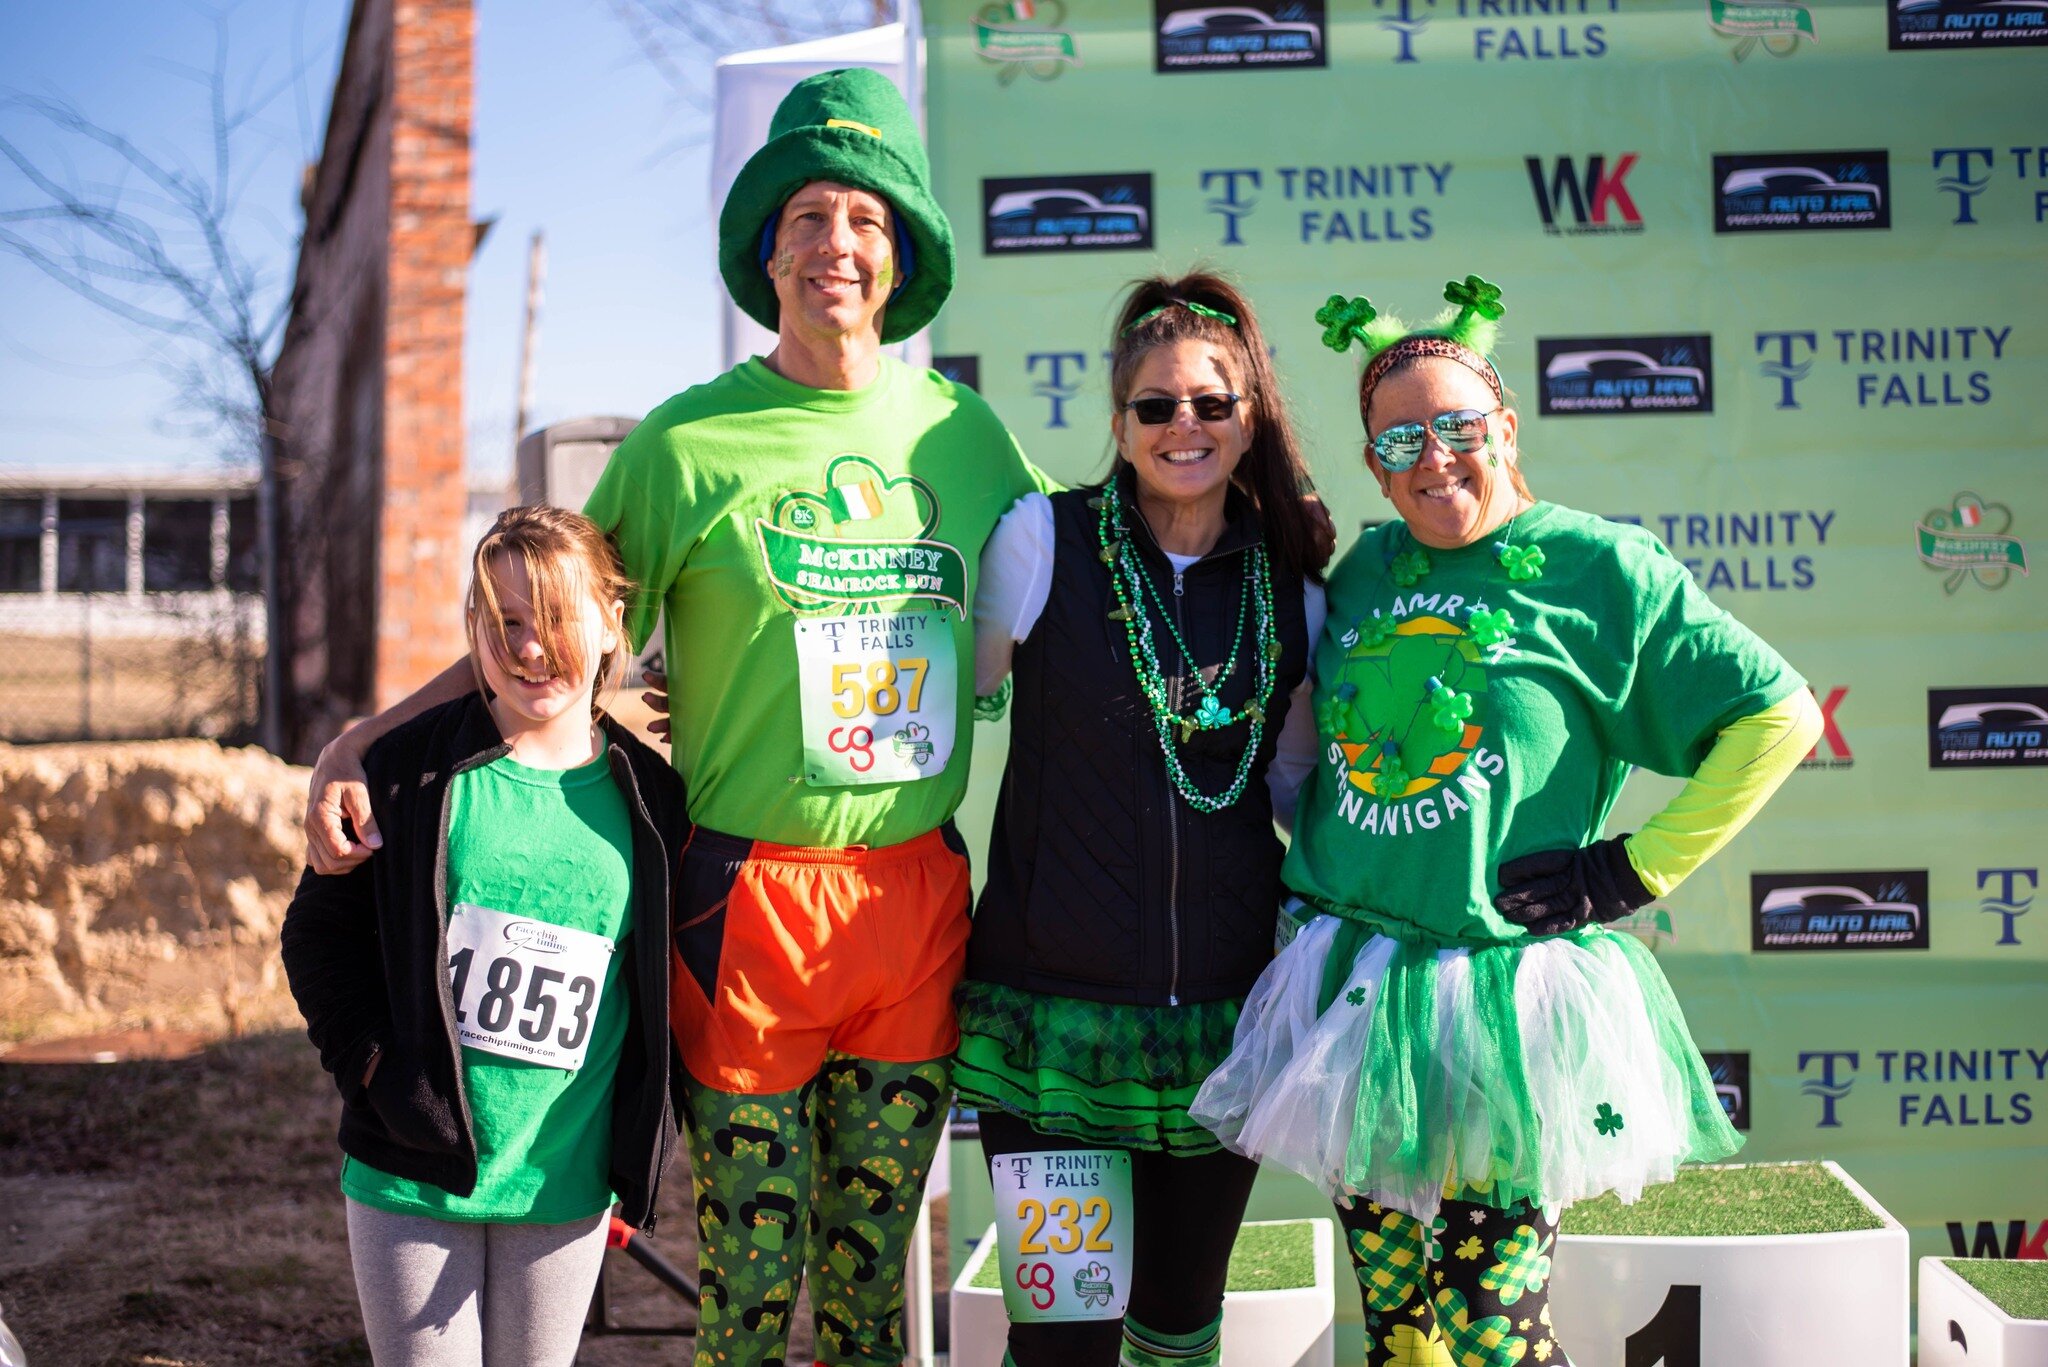 Green beer and St. Patty's Day Cheer! 🍀🍺 Get festive and join us THIS Saturday at TUPPS Brewery for the Shamrock Run 5k! 😆 Following the race there will be local vendors, delicious food, GREEN TUPPS beer, costume contests, a complimentary photo bo